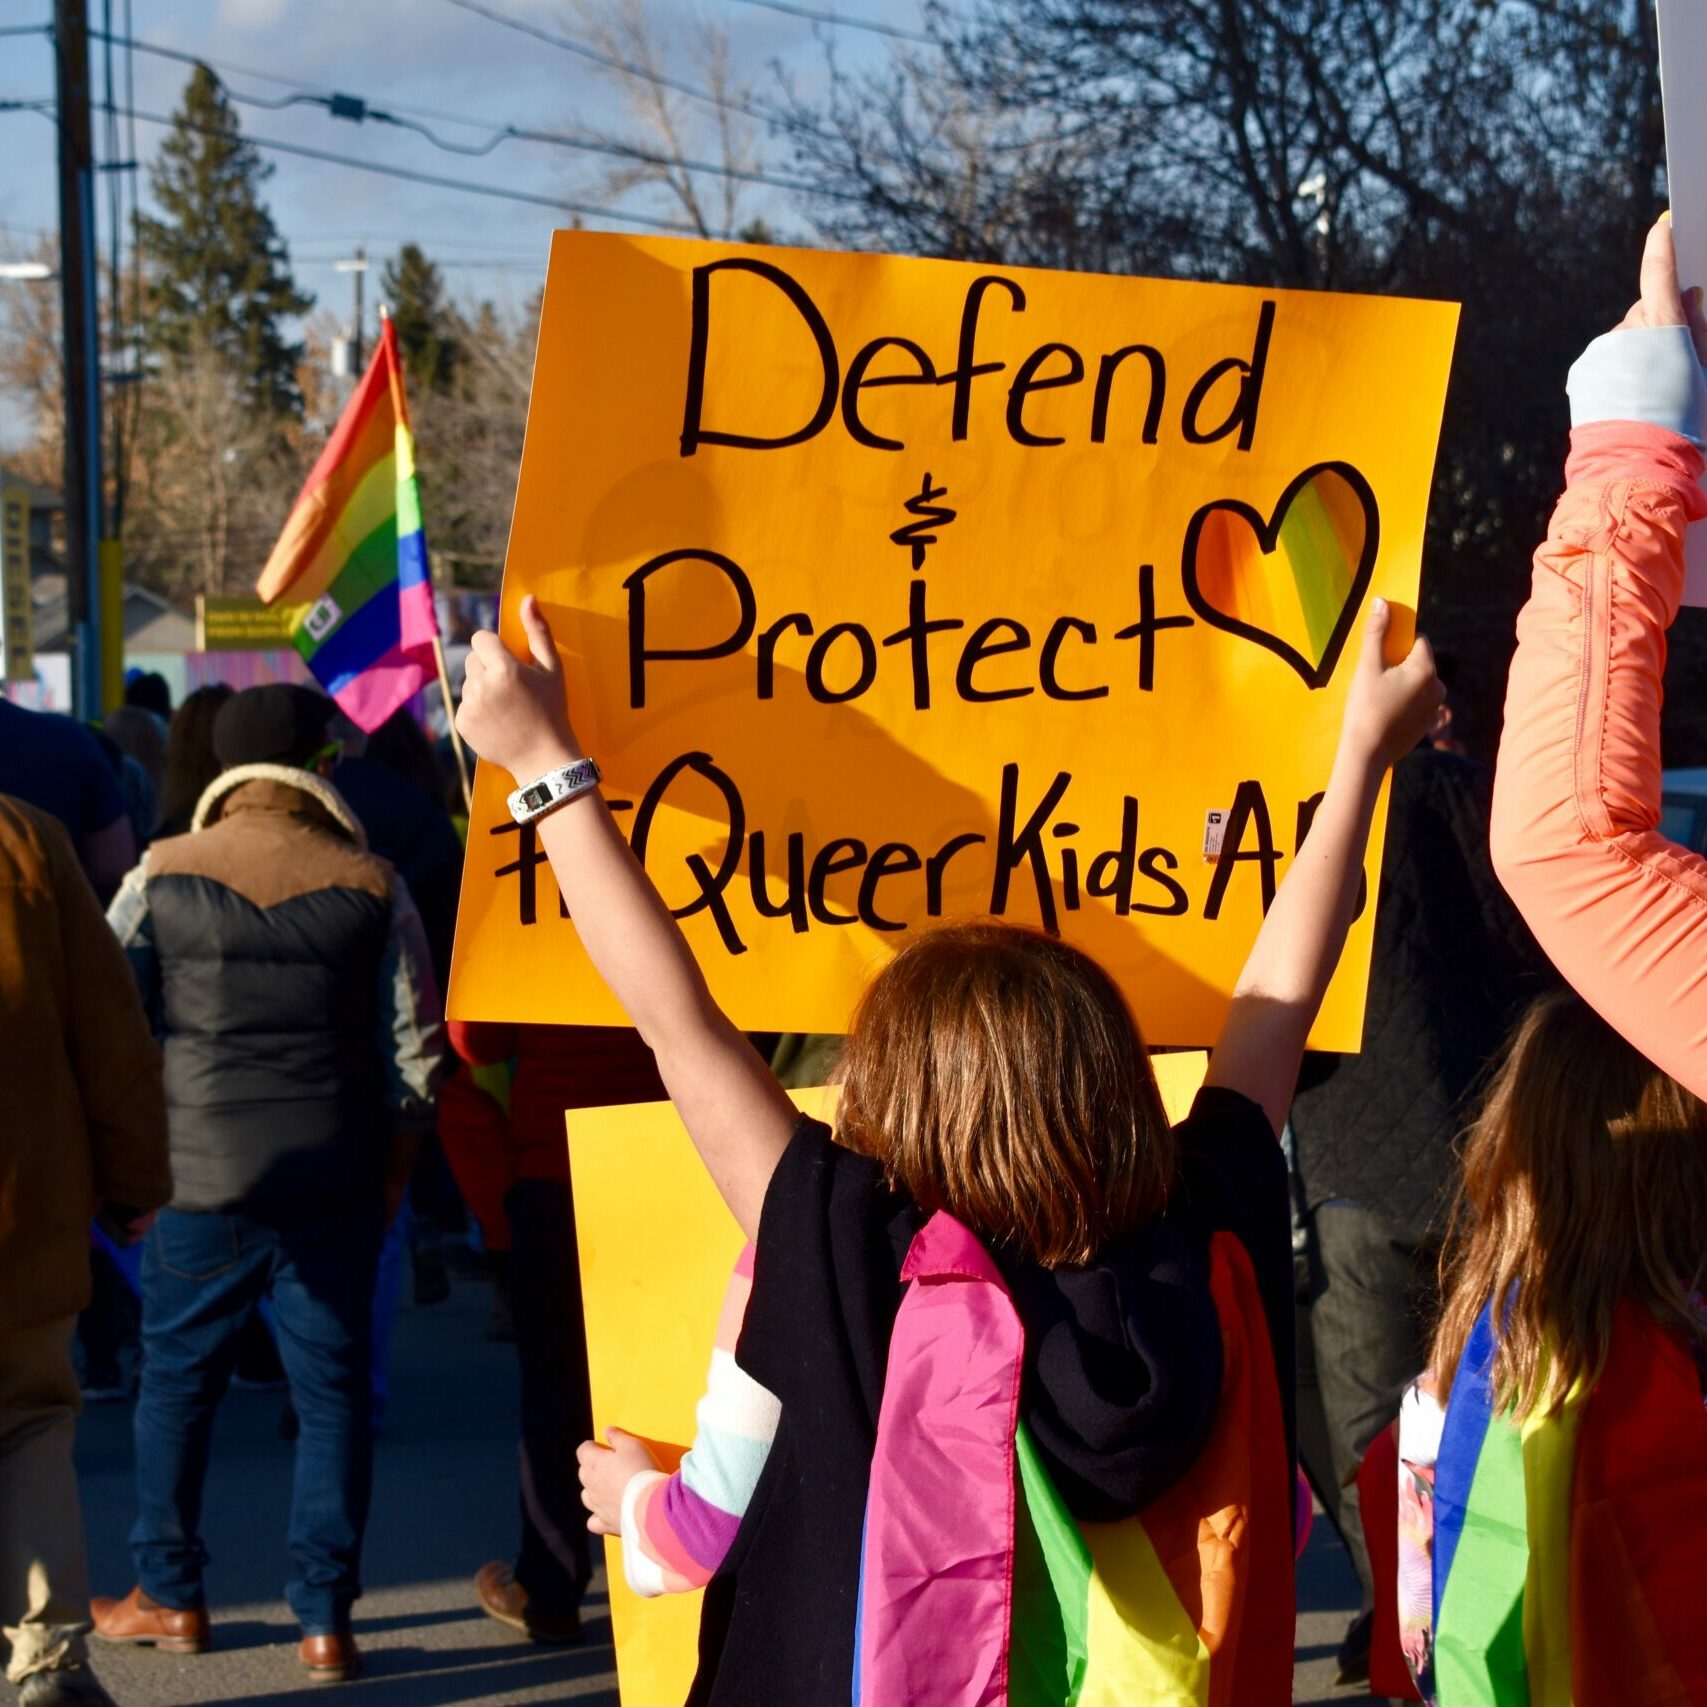 Image of people at a protest. One child holds up a sign that says Defend and Protect Queer Kids